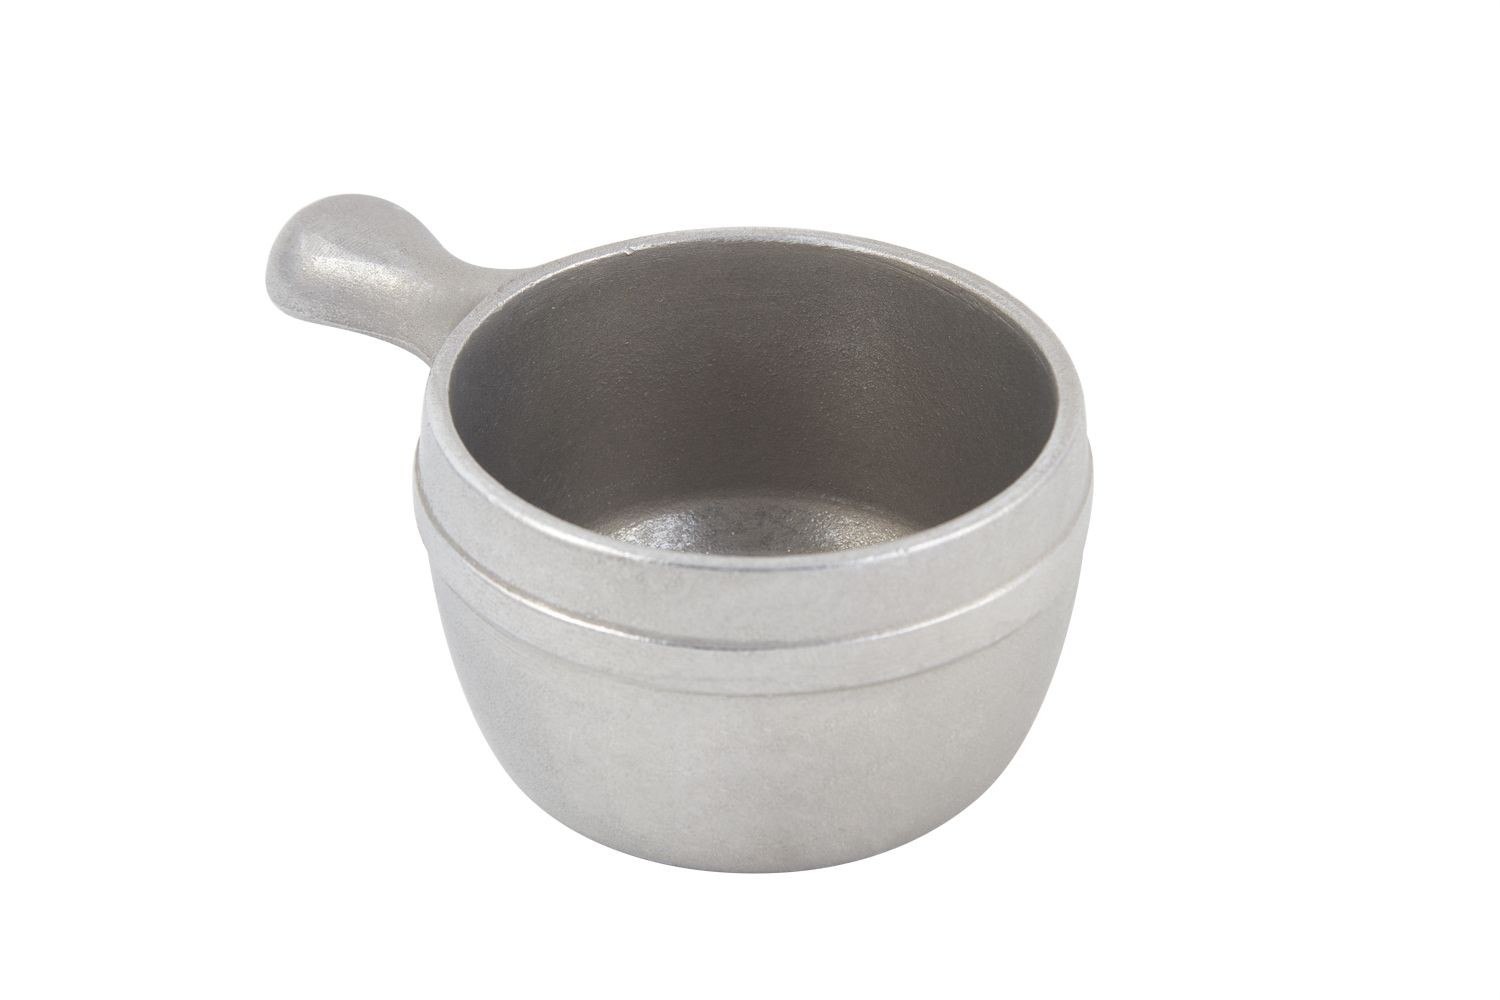 Bon Chef 3025P Soup Bowl with Side Handle, Pewter Glo 12 oz., Set of 6